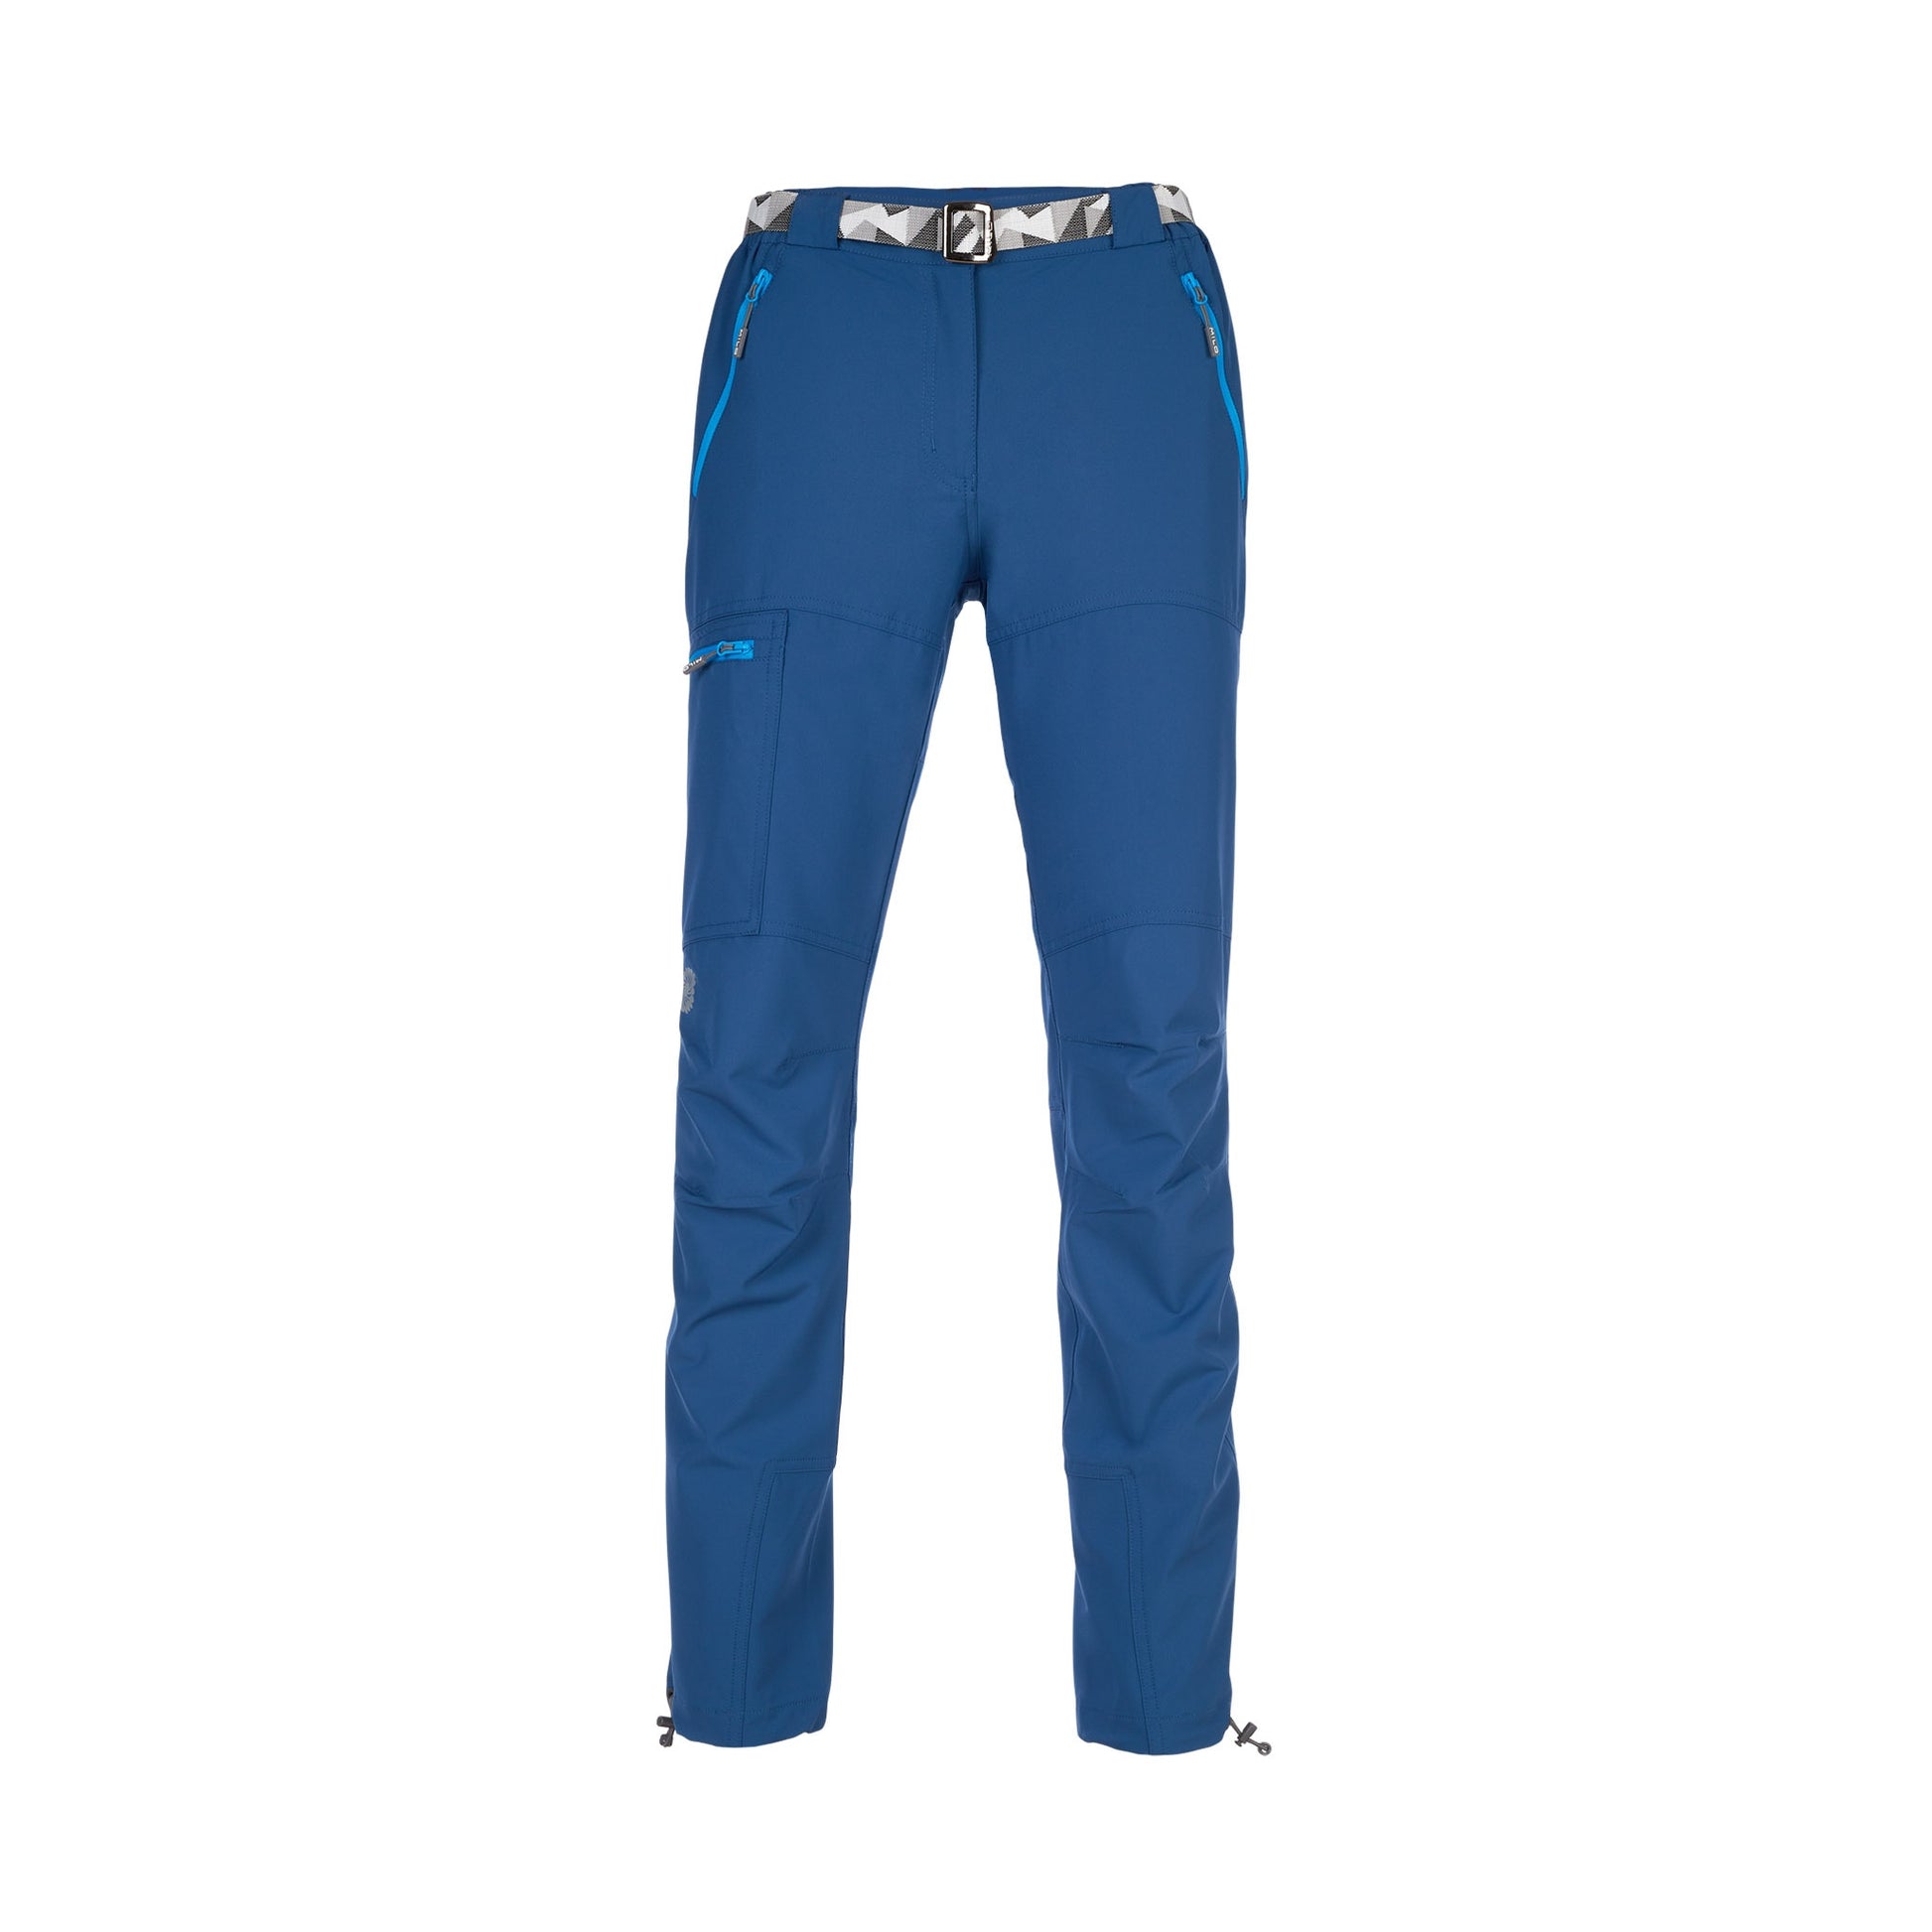 Buy Turquoise Blue Pant with Side Chain and Pocket Cotton Flex Pant with  Side Chain and Pocket for Best Price, Reviews, Free Shipping